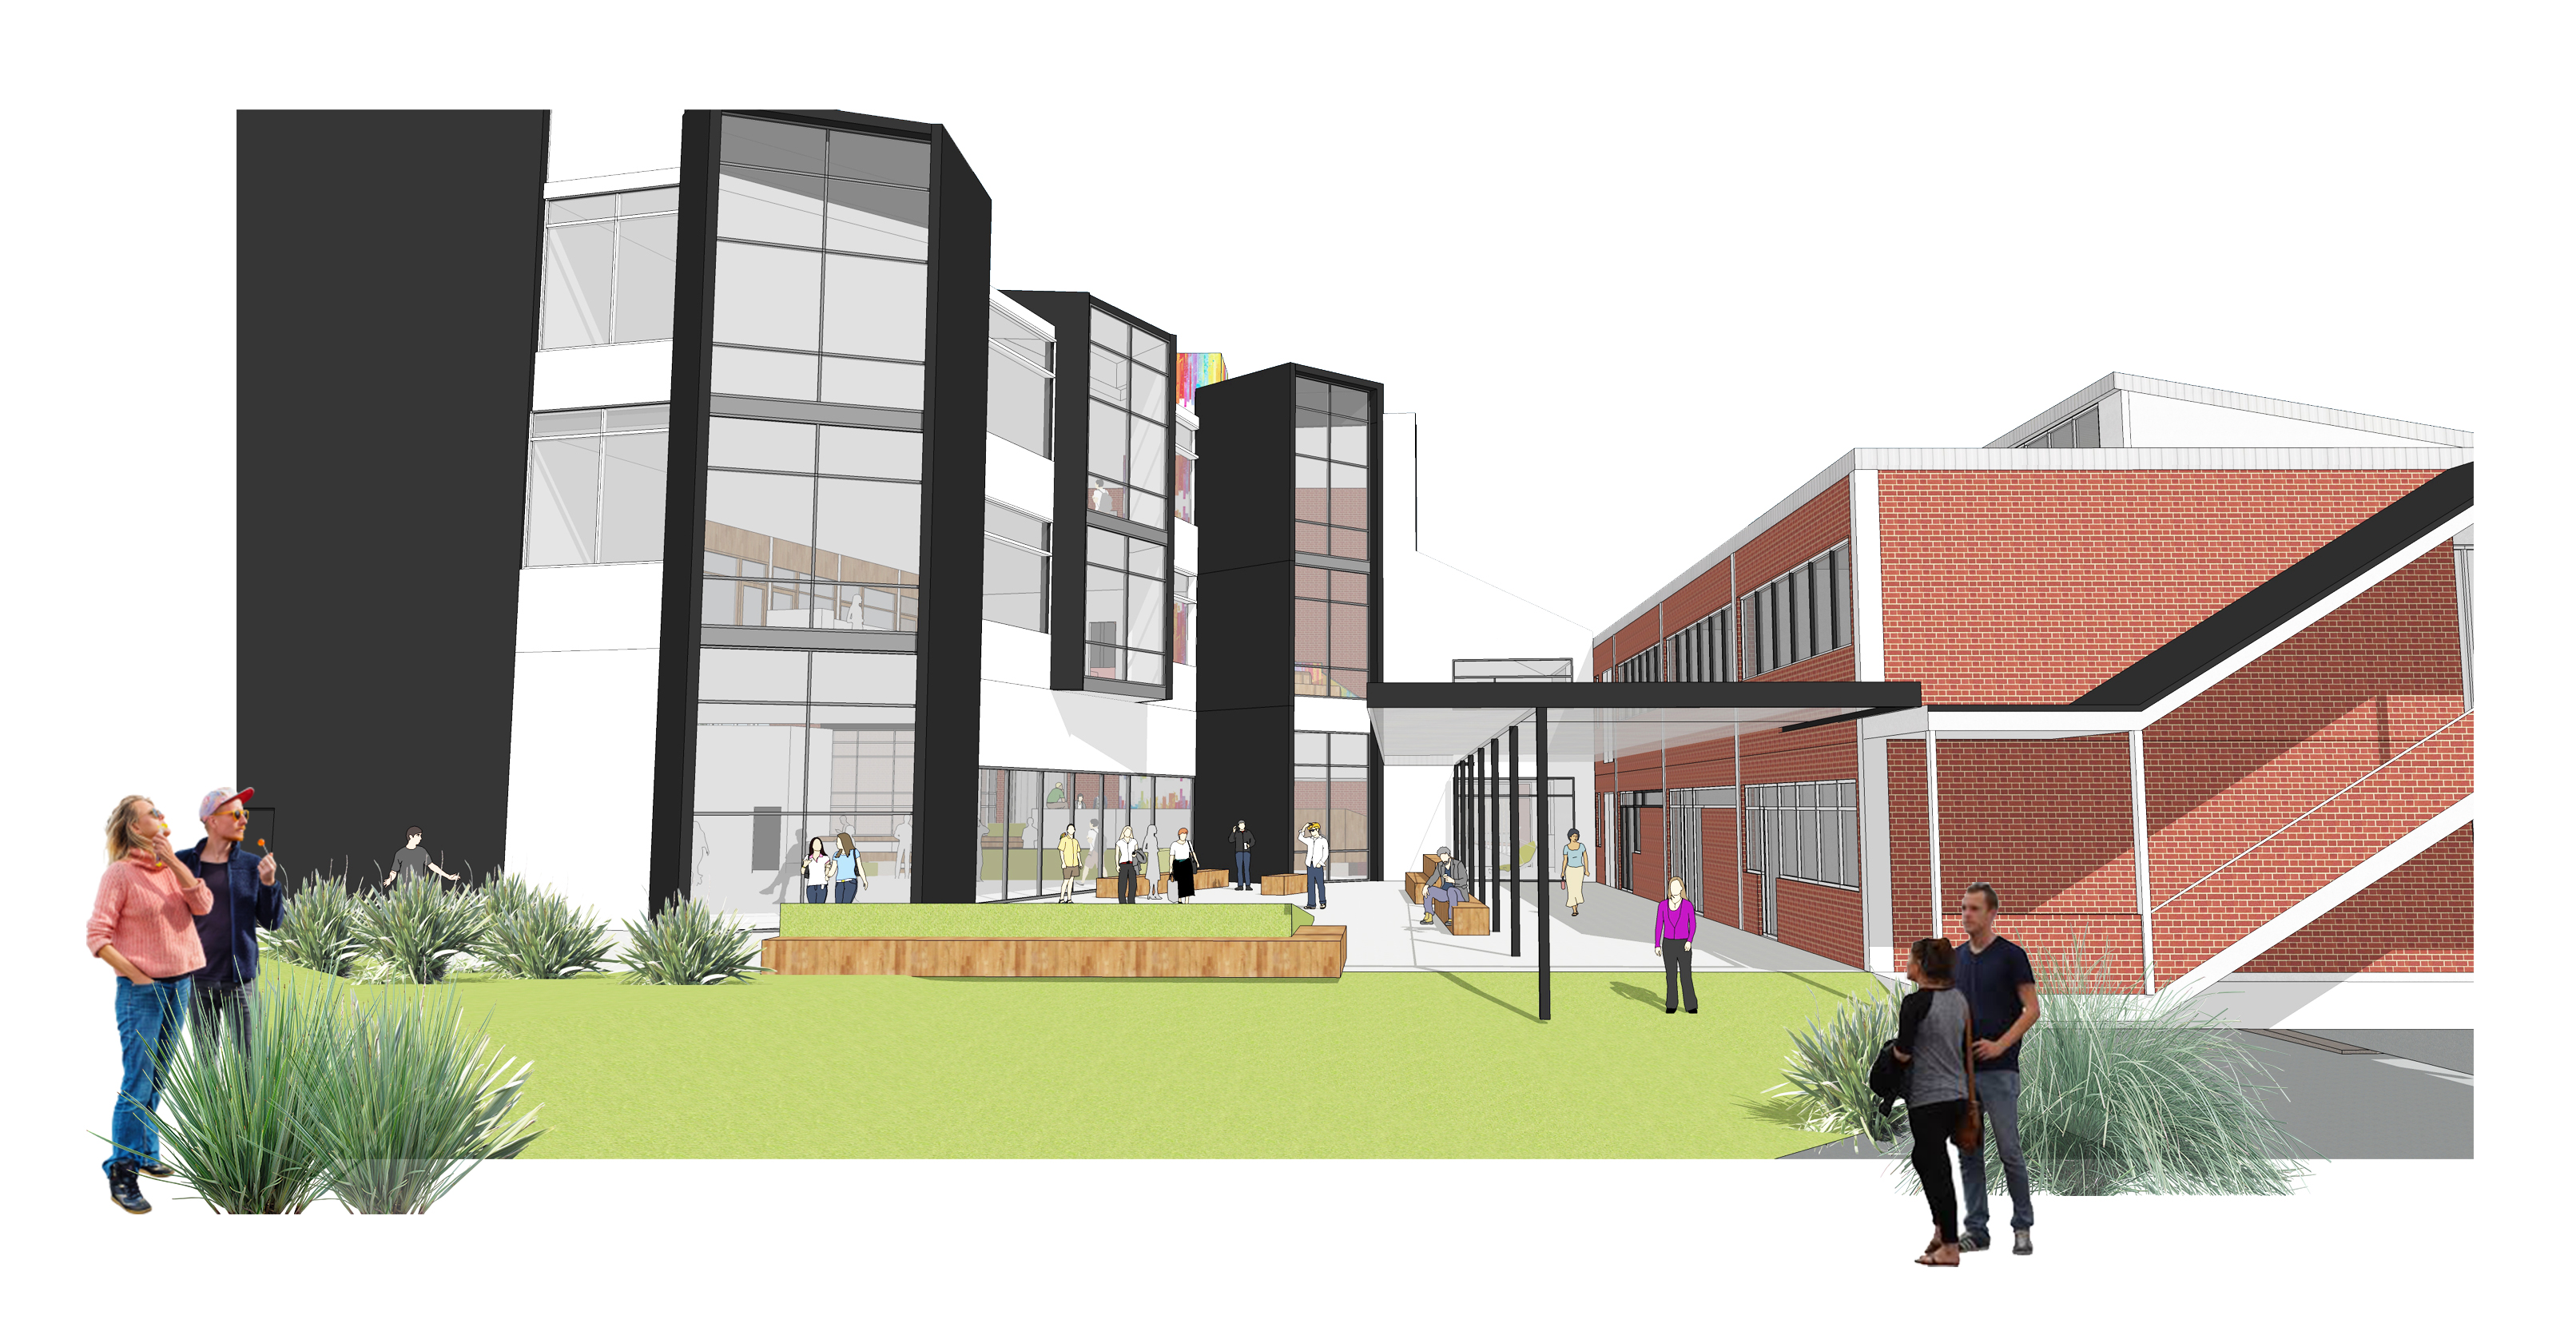 A 3D concept image of two new school buildings. One, on the left, has a mostly white and black exterior with lots of windows. It's 3 storeys tall. The building on the right is red brick with white details. It is two storeys. There is a veranda and lawn.